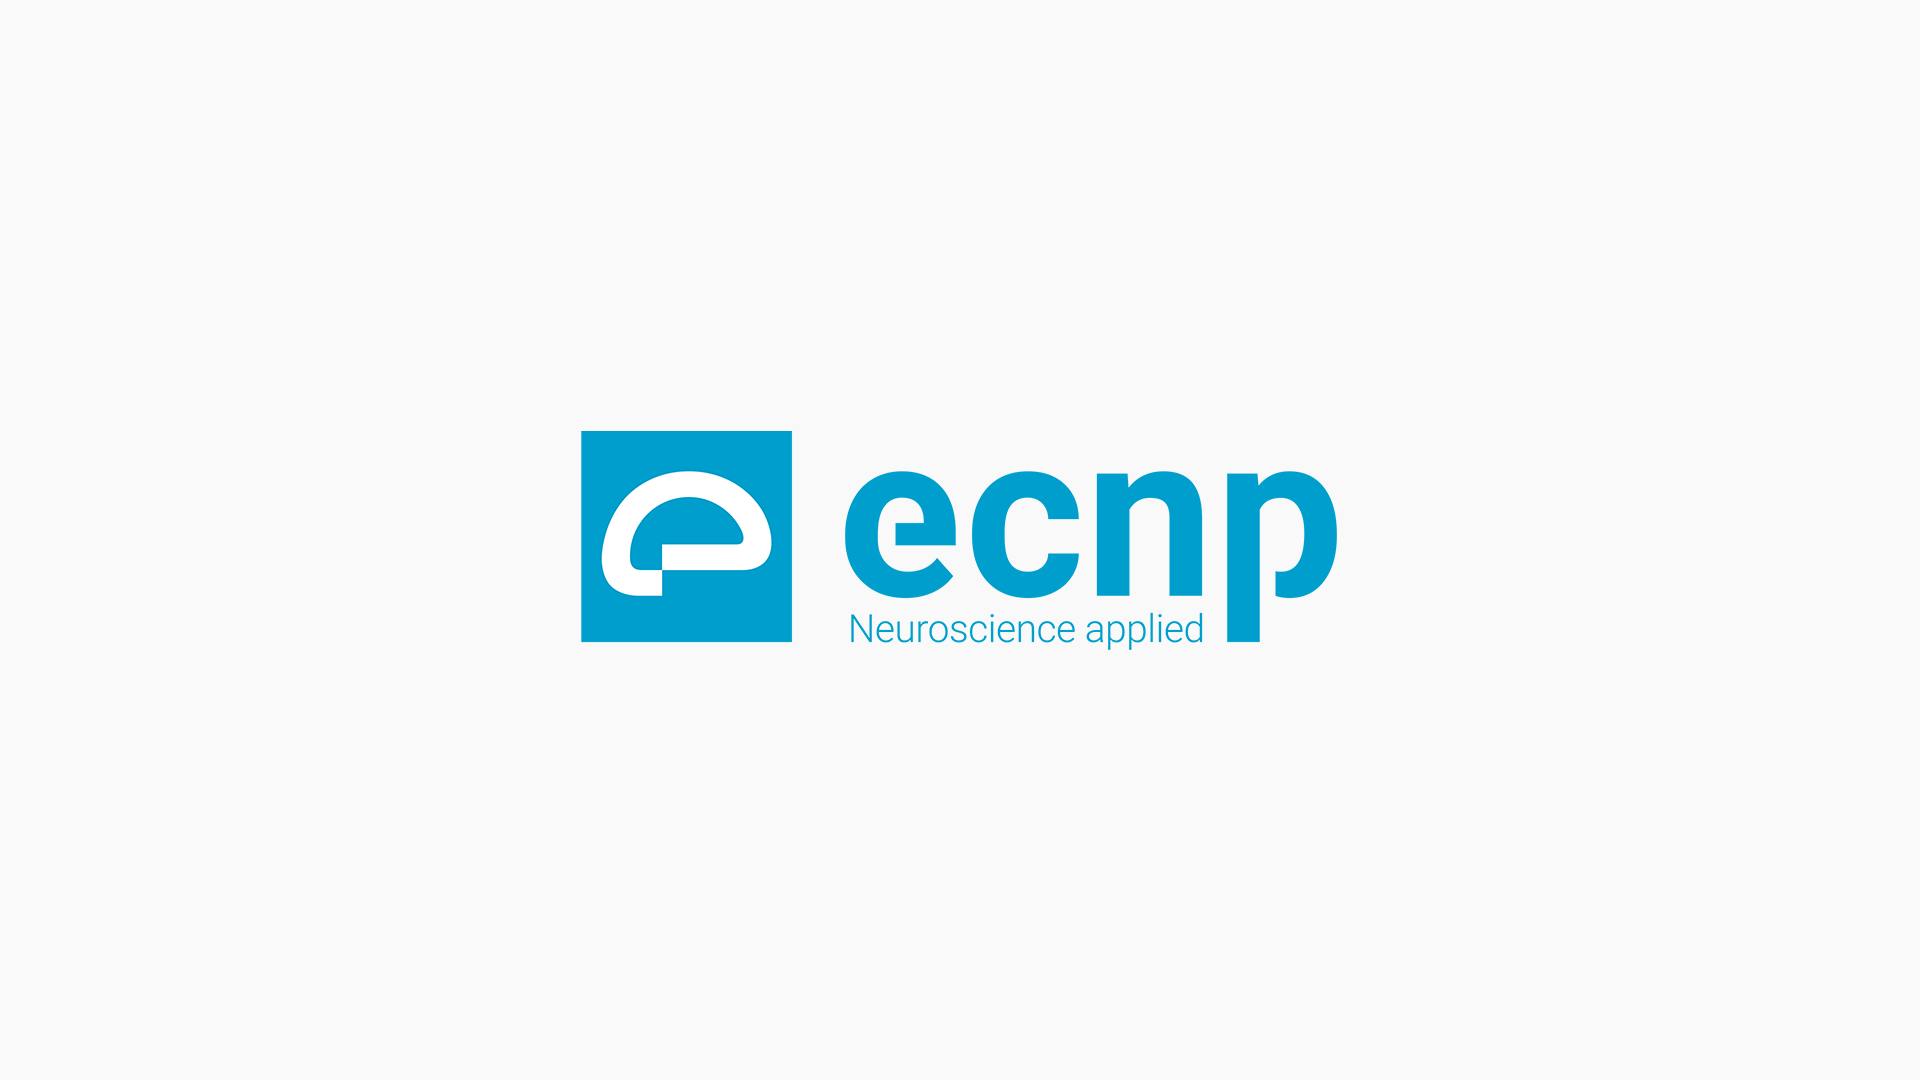 ECNP logo: light blue square containing a stylized white brain and written on the side "ecnp Neuroscience applied."